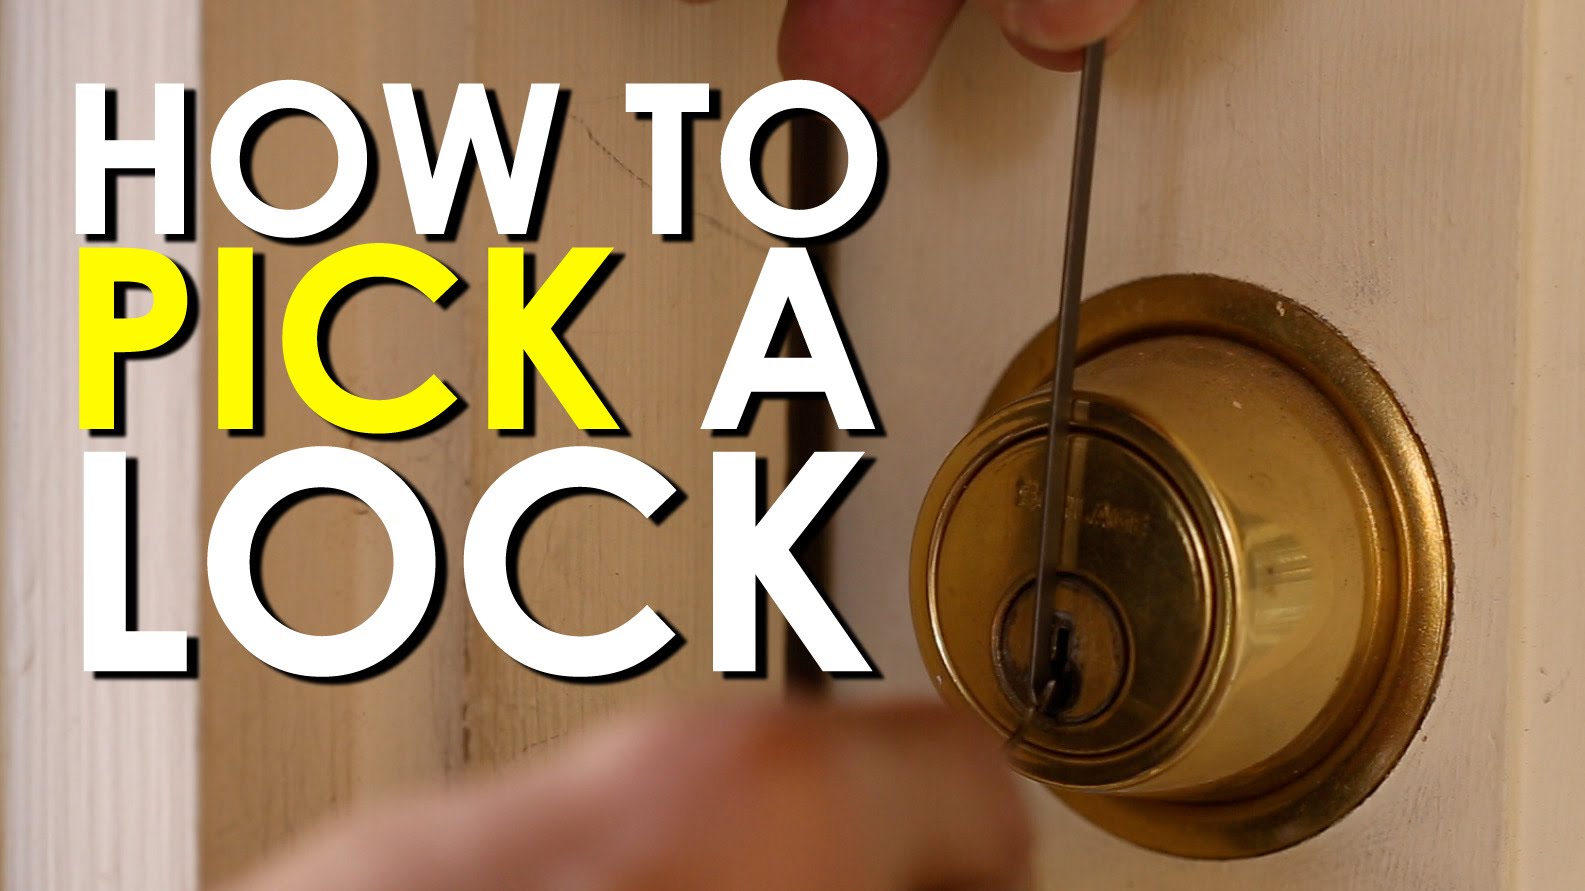 How to pick up. Lock pick. How to pick a Lock. How to pick a Door Lock. How to pick a Level Lock.